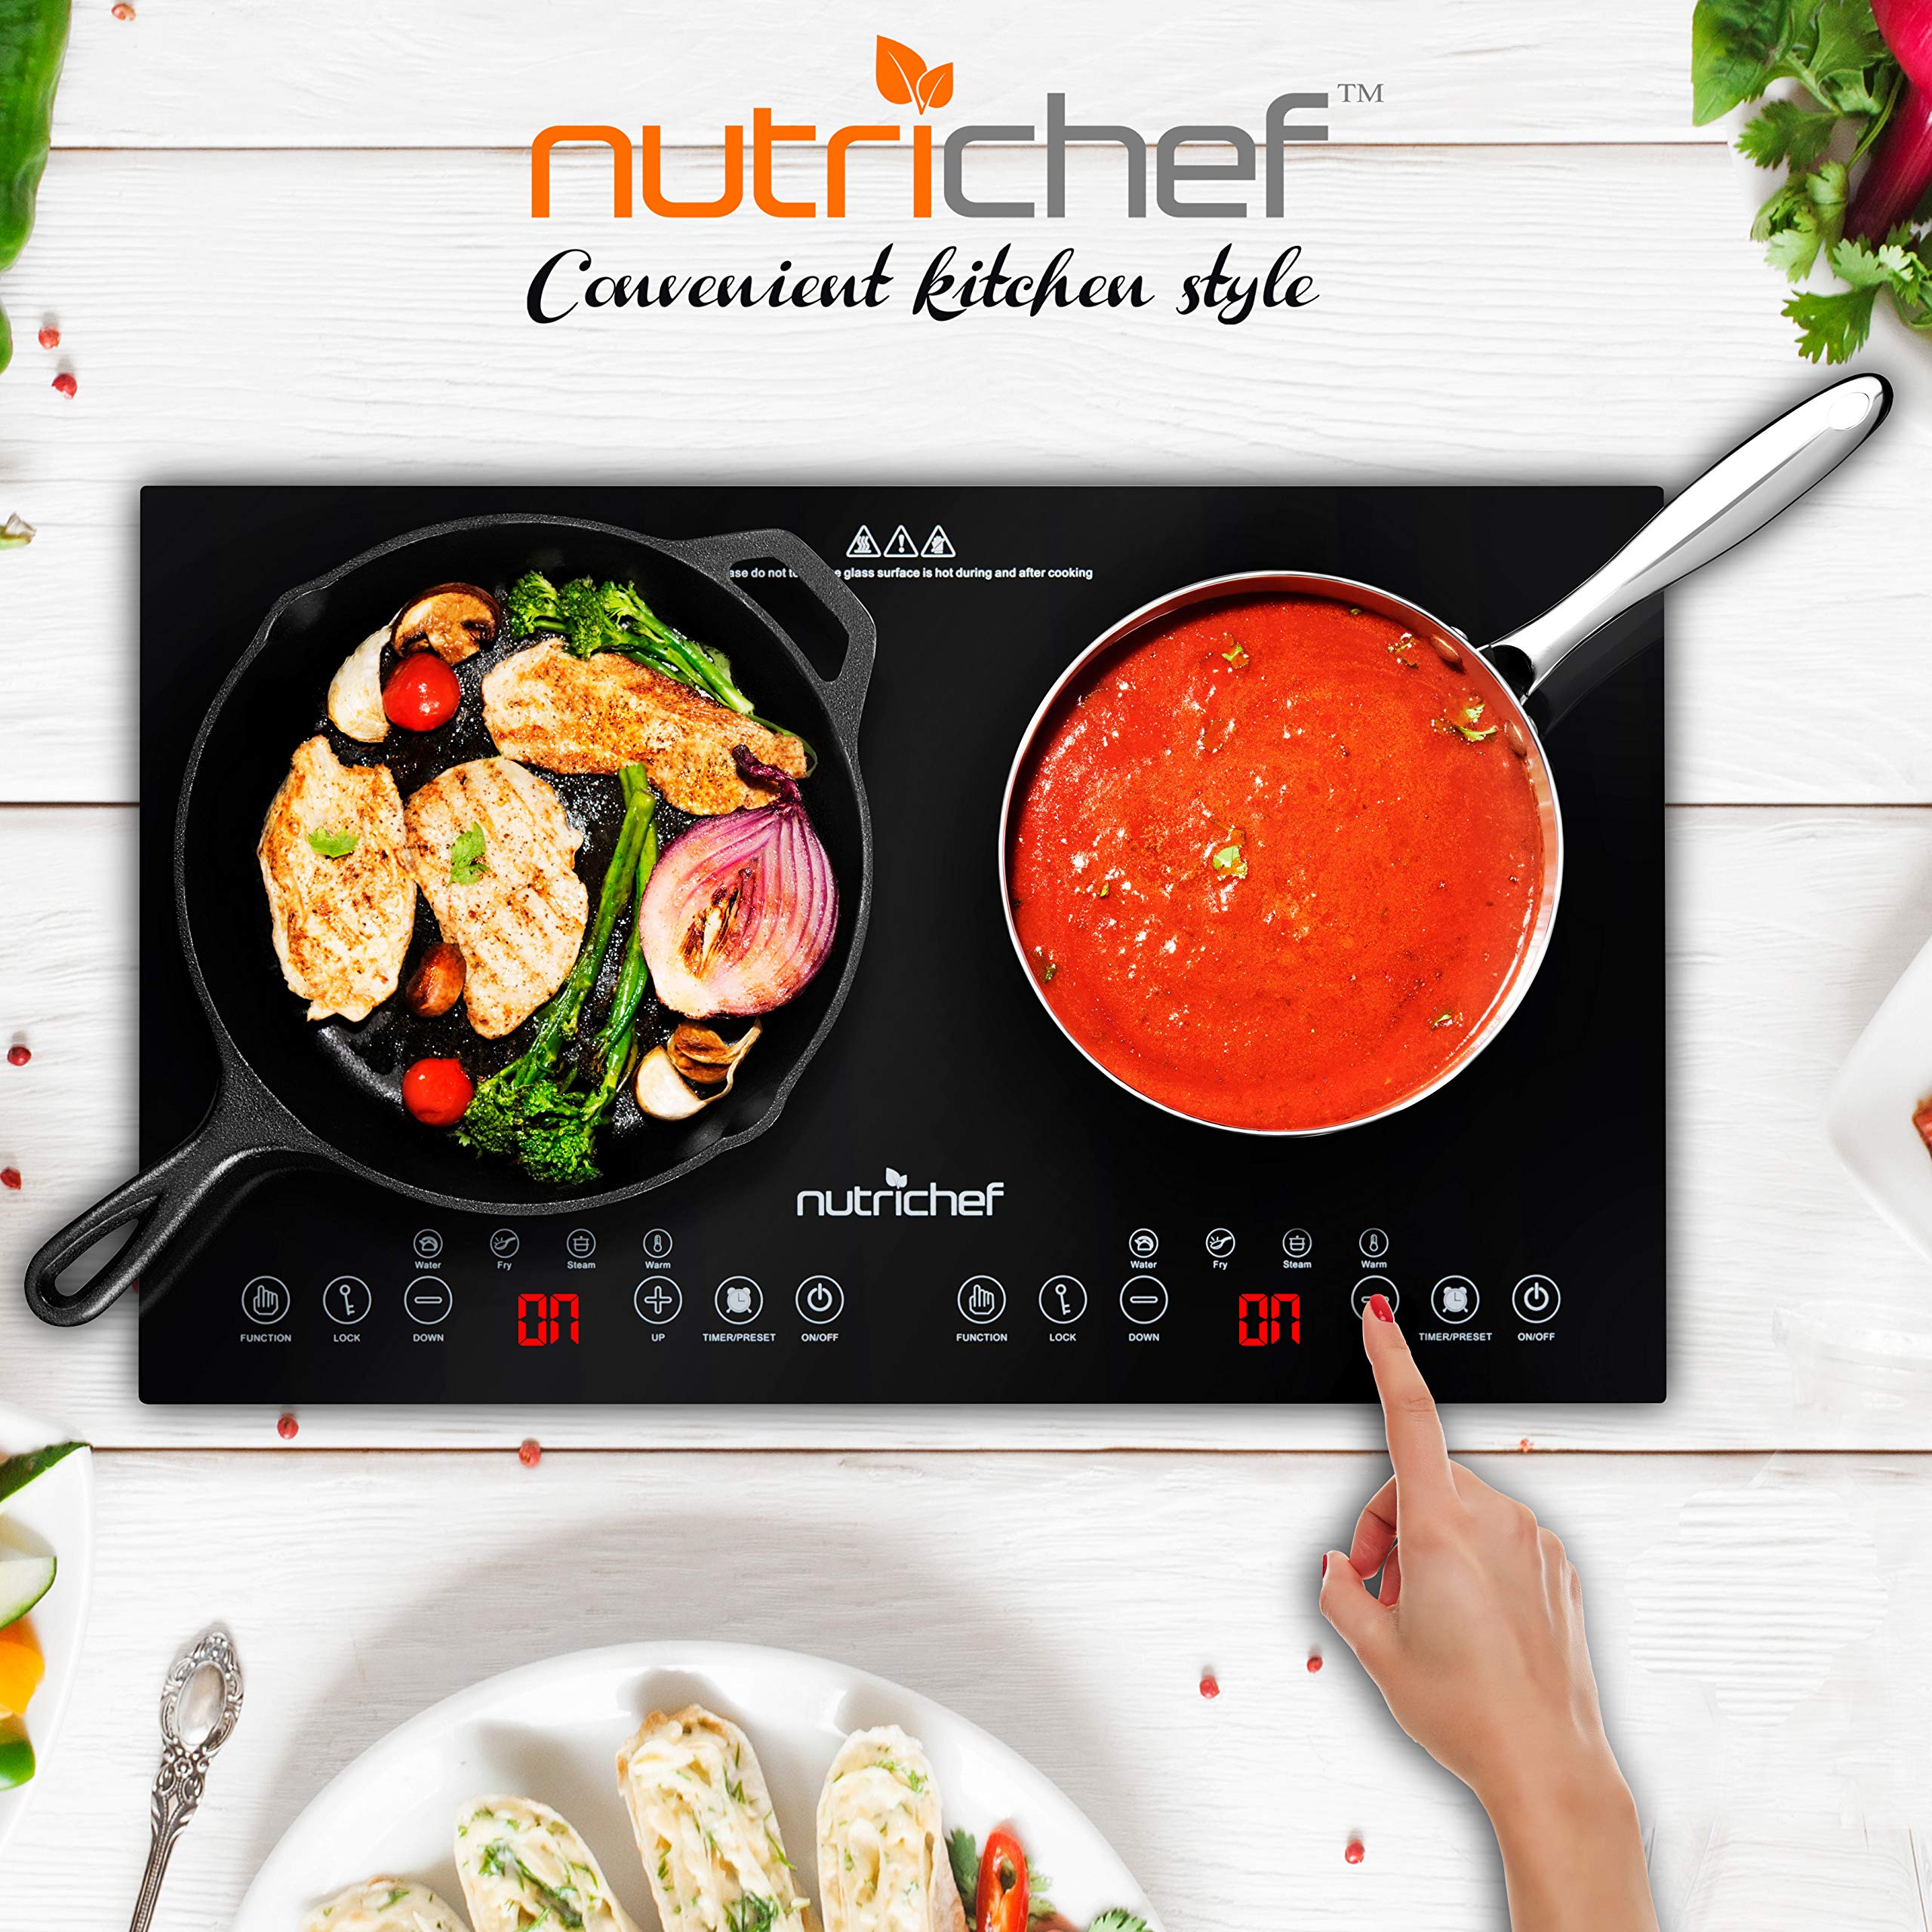 NutriChef Double Induction Cooktop - Portable 120V Digital Ceramic Dual Burner w/ Kids Safety Lock - Works with Flat Cast Iron Pan,1800 Watt,Touch Sensor Control, 12 Controls - NutriChef PKSTIND48